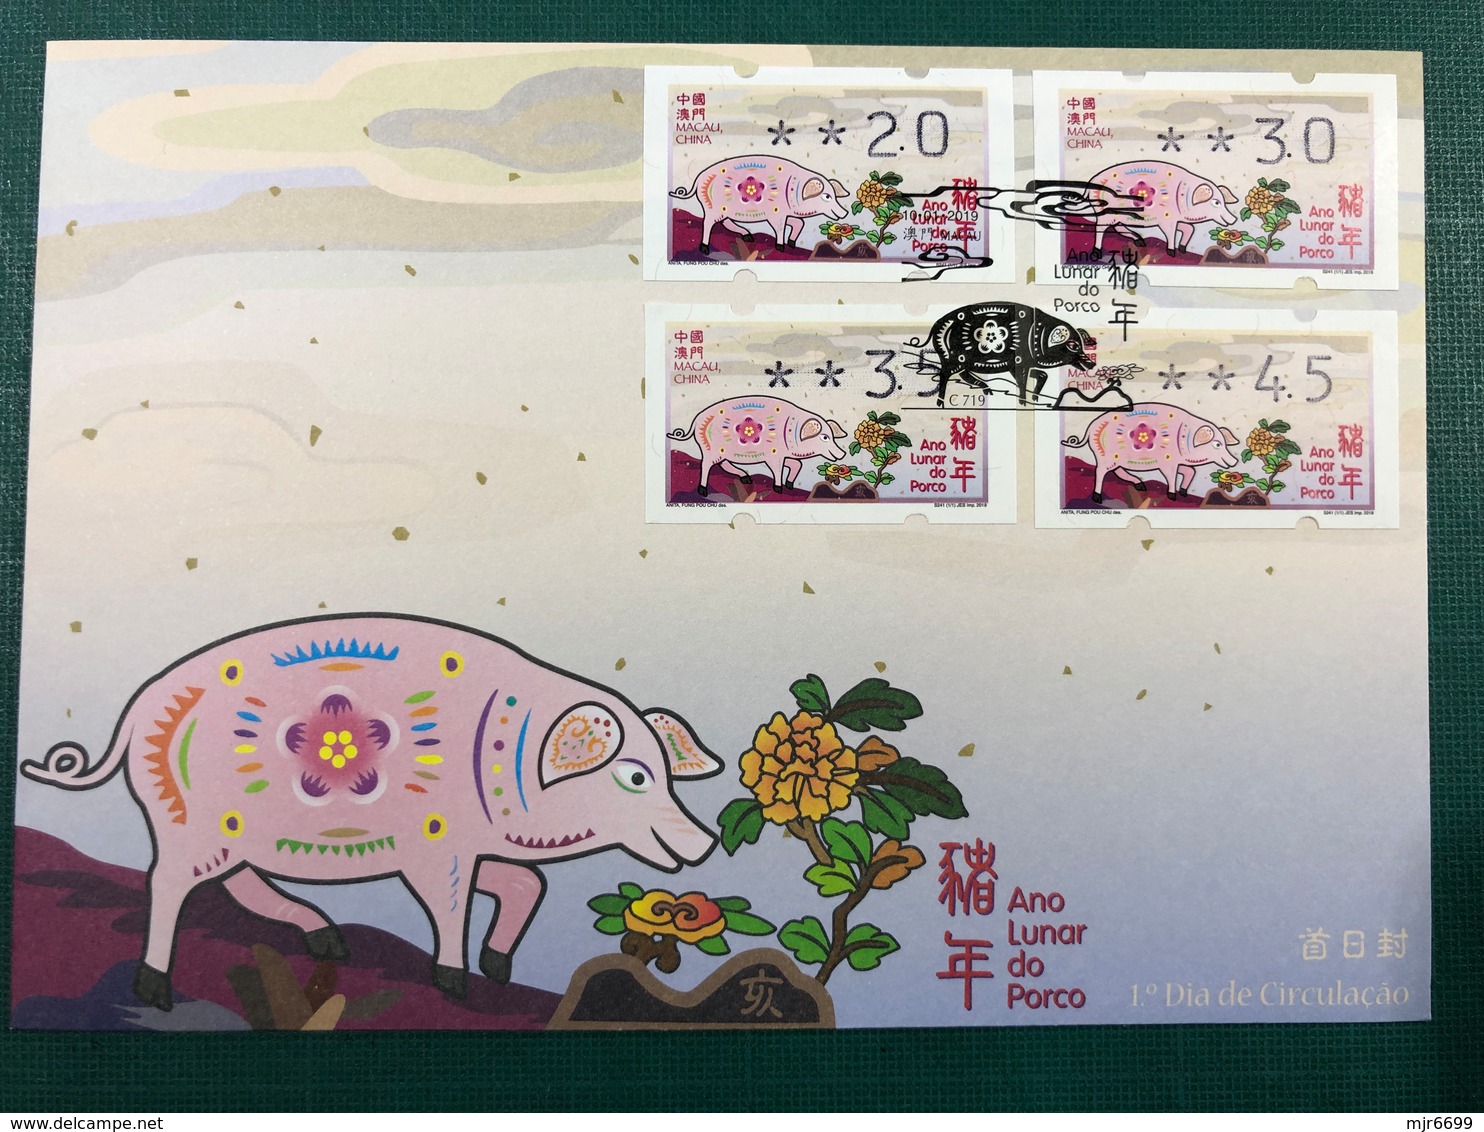 MACAU, 2019 ATM LABELS CHINESE ZODIAC YEAR OF THE PIG FIRST DAY COVER - Distribuidores